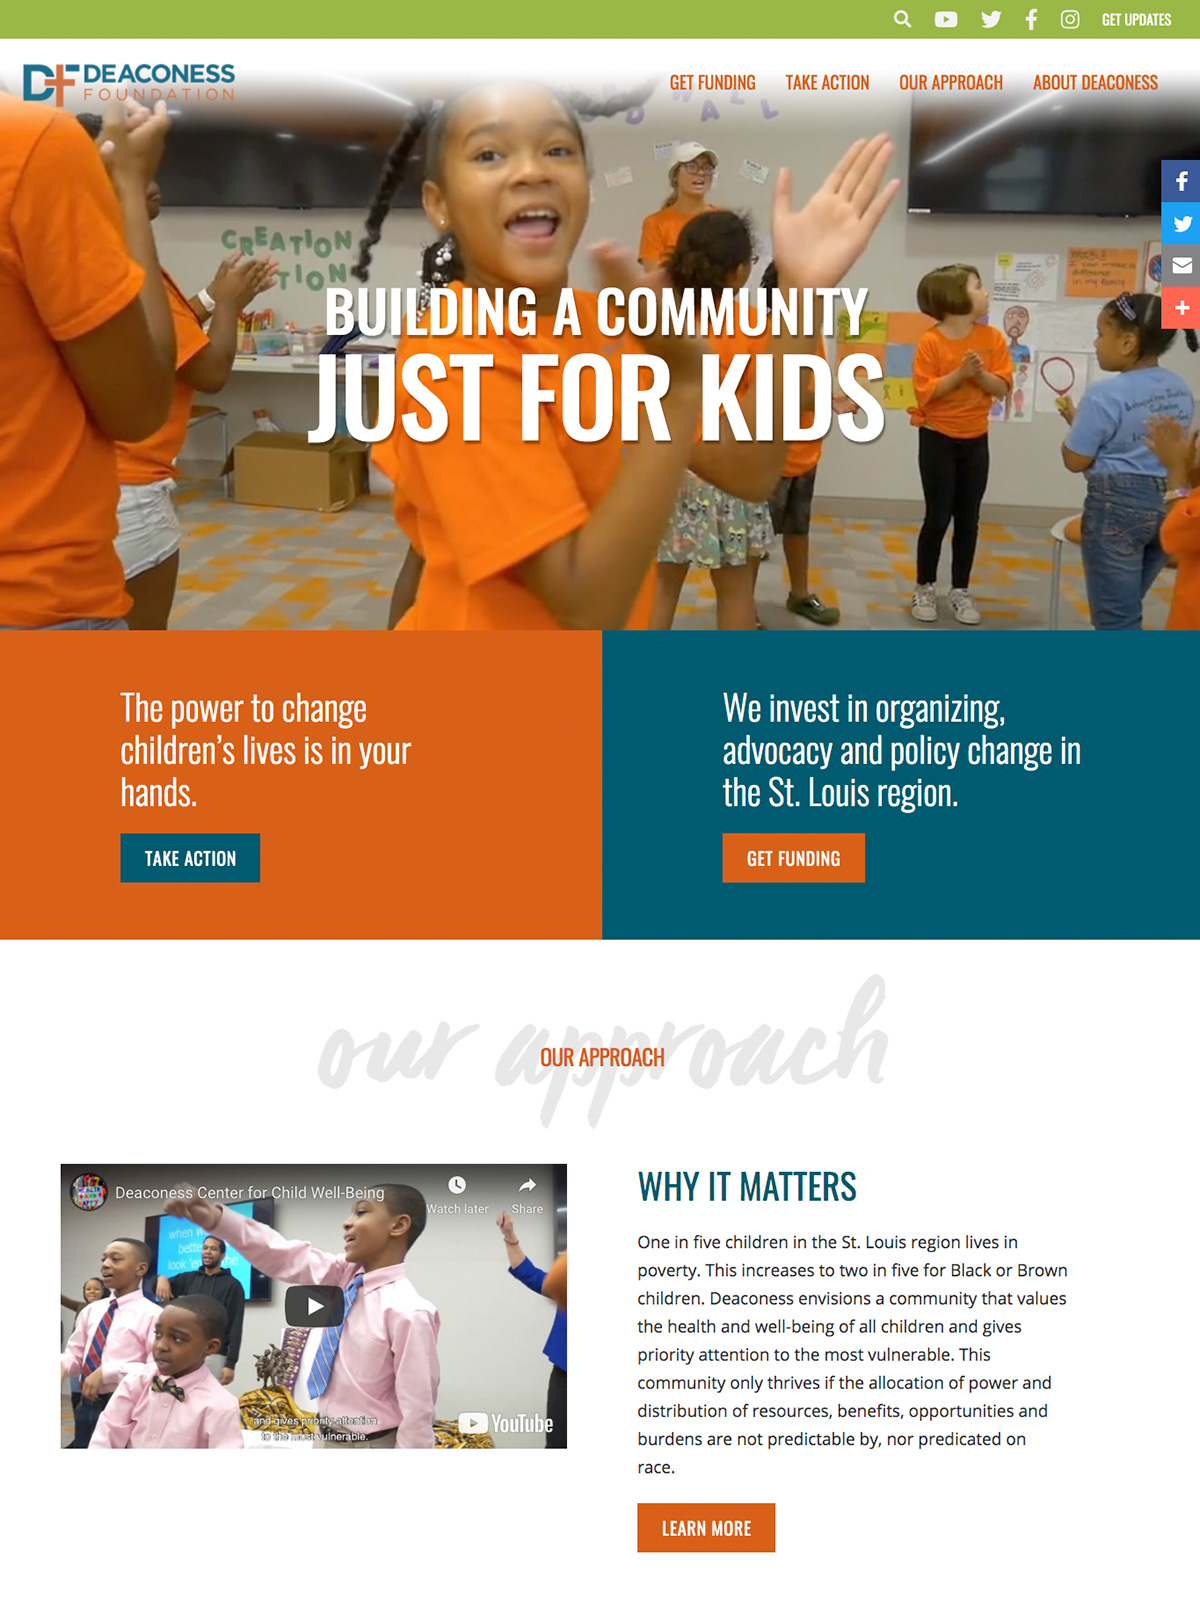 home page of the Deaconess Foundation website